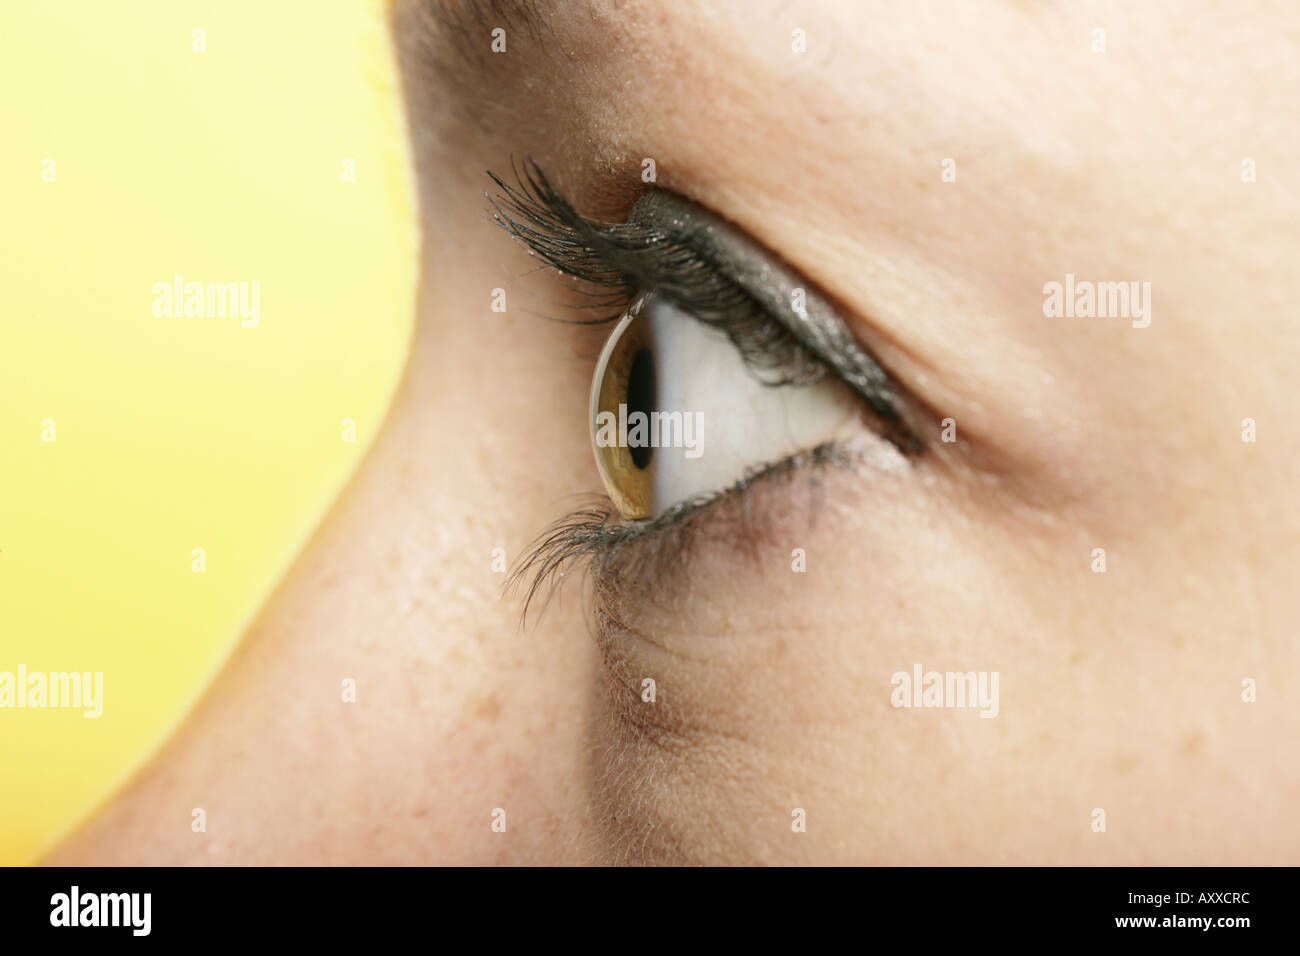 Profile close up of a woman's eye. Banque D'Images